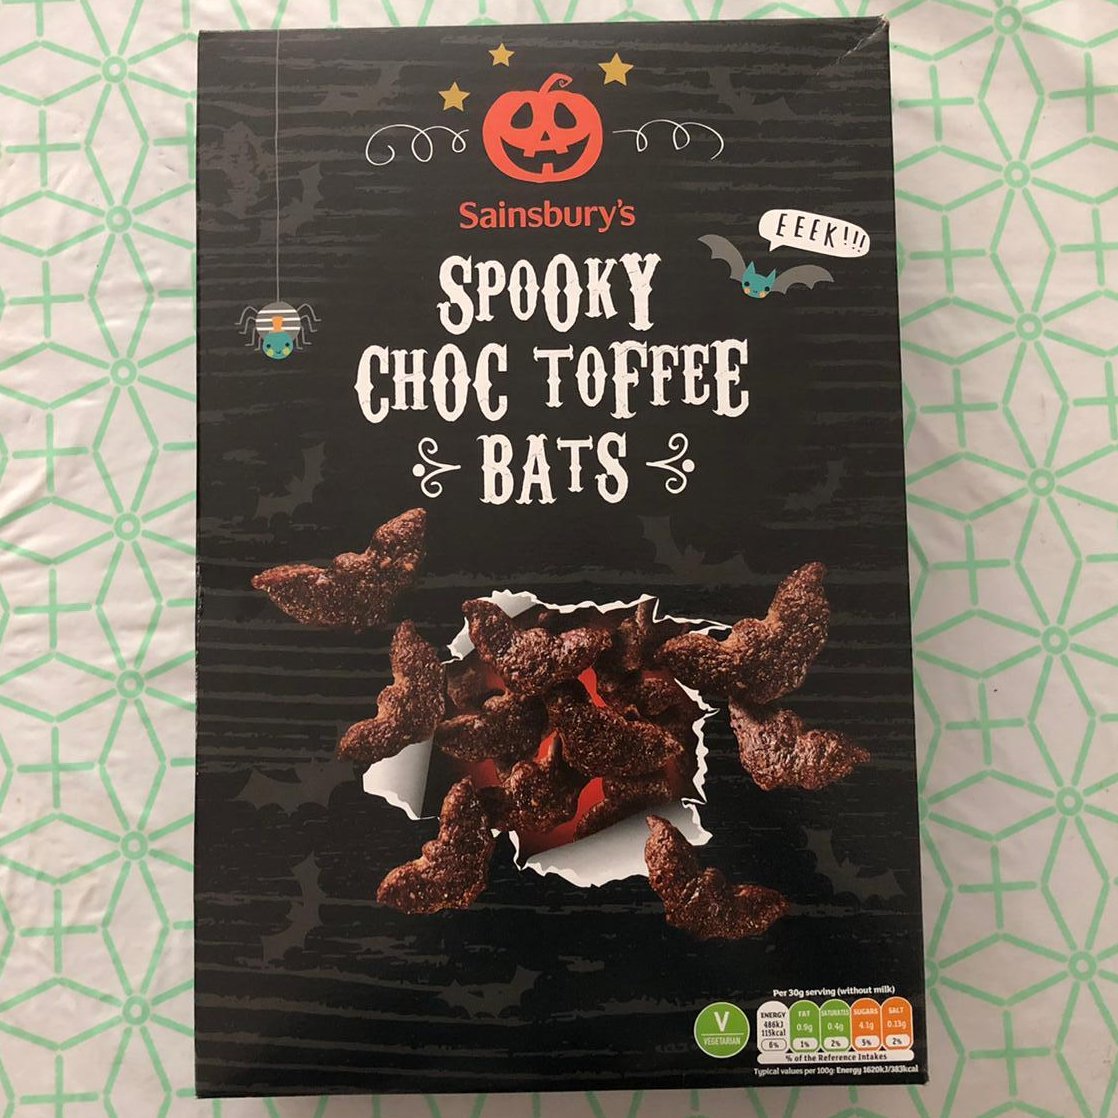 SPOOKY CHOC TOFFEE BATS These are supposed to be bats, but the only thing they bear a passing resemblance to is number 3 on the Bristol stool chart /5